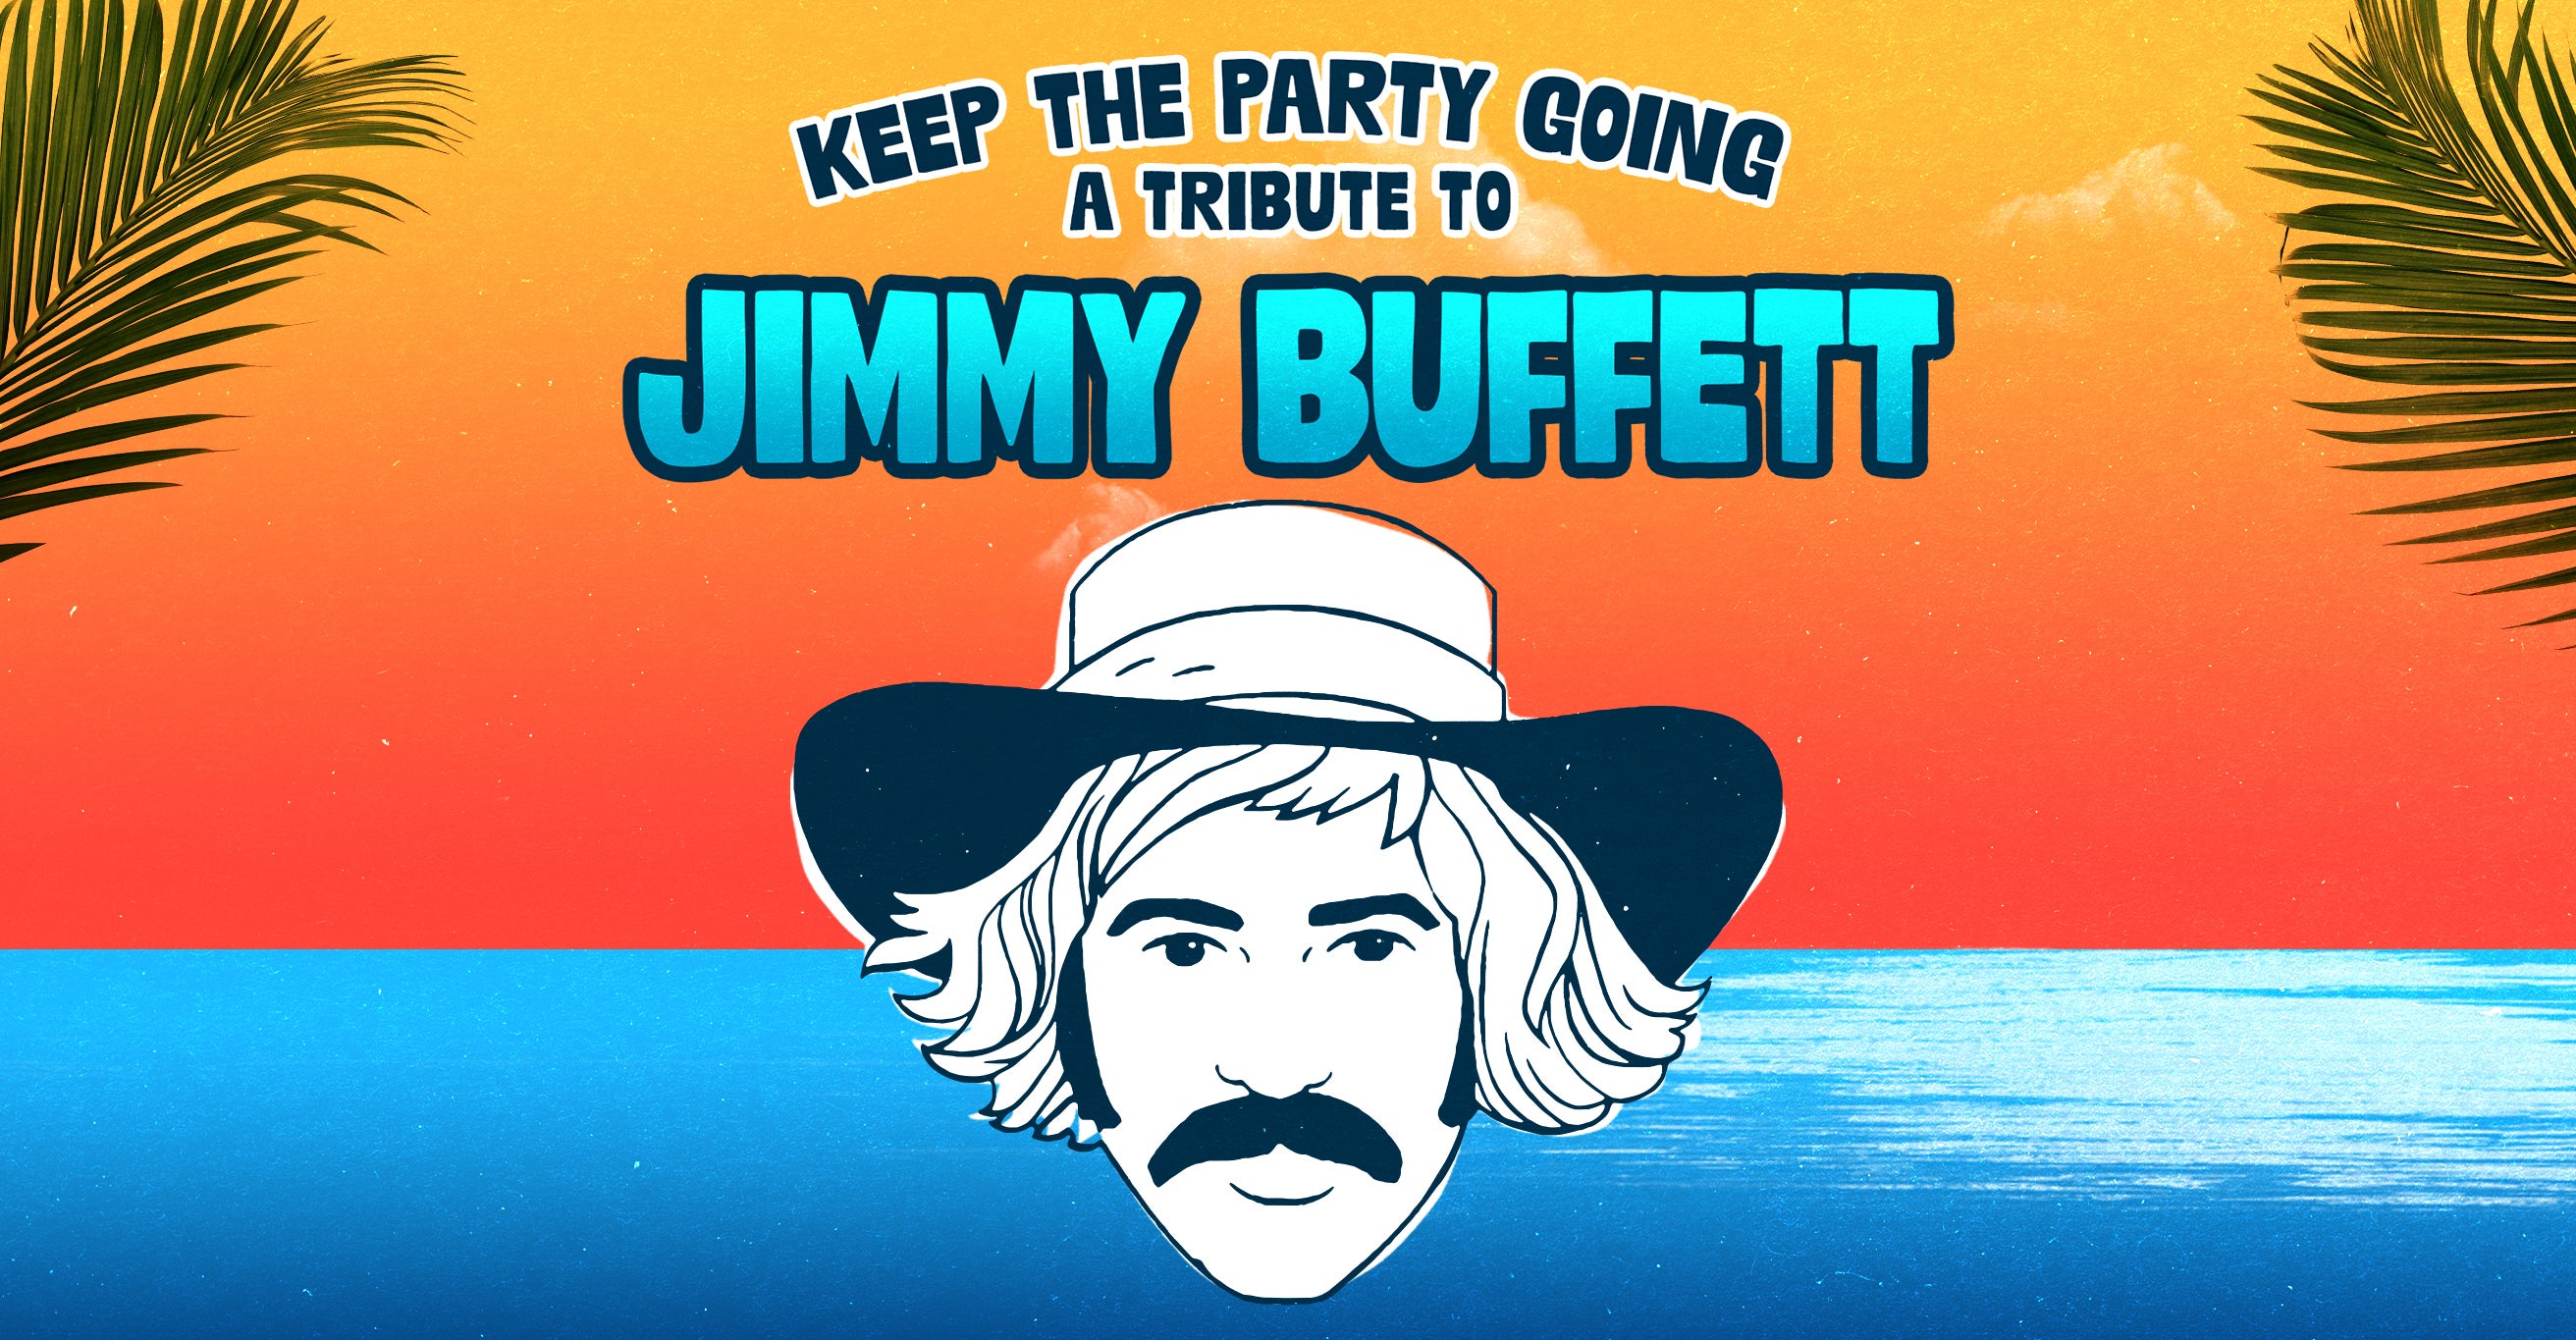 Keep the Party Going: A Tribute to Jimmy Buffett in Hollywood promo photo for LNHS presale offer code